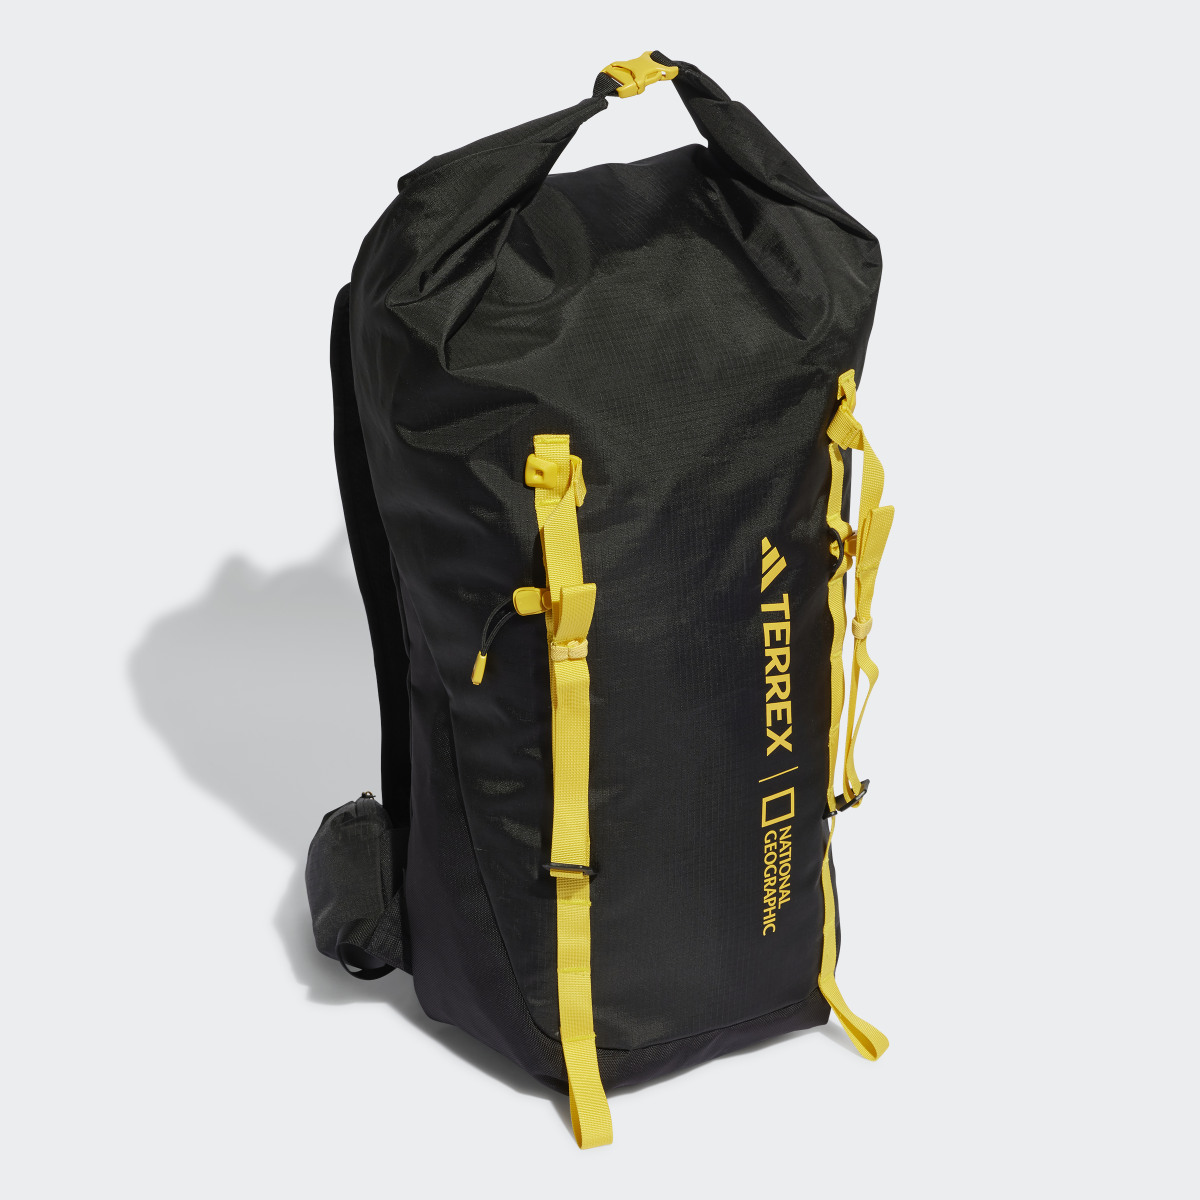 Adidas Colorful x National Geographic AEROREADY Backpack. 4